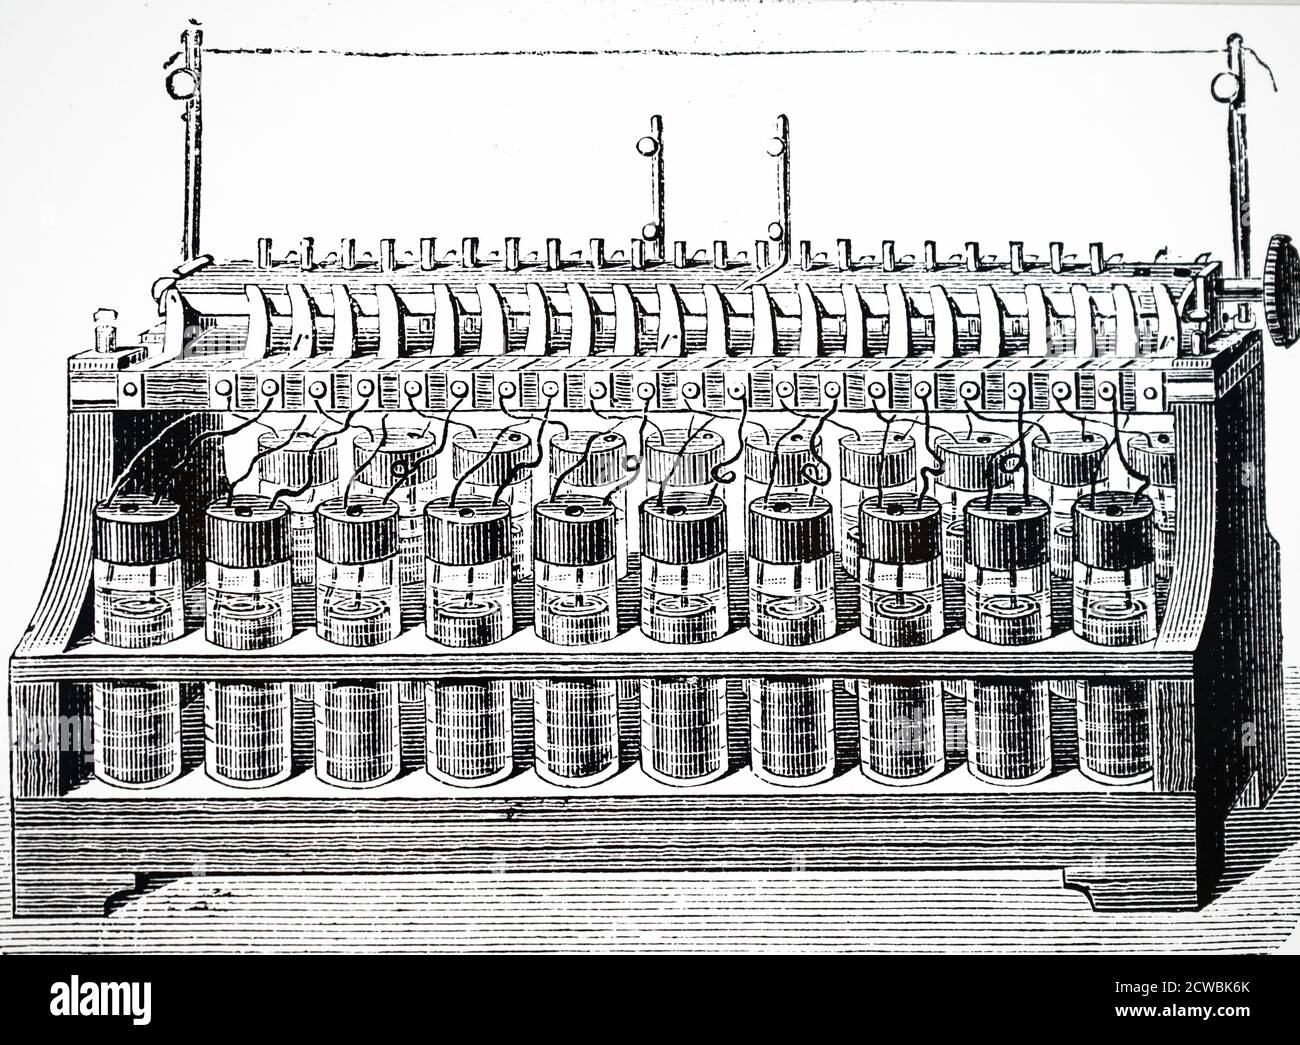 Engraving depicting a secondary battery. Battery of Plante cells (accumulators) of 20 elements. The Plante cell (1860) was 2 spiral lead plates immersed in diluted sulphuric acid. Stock Photo